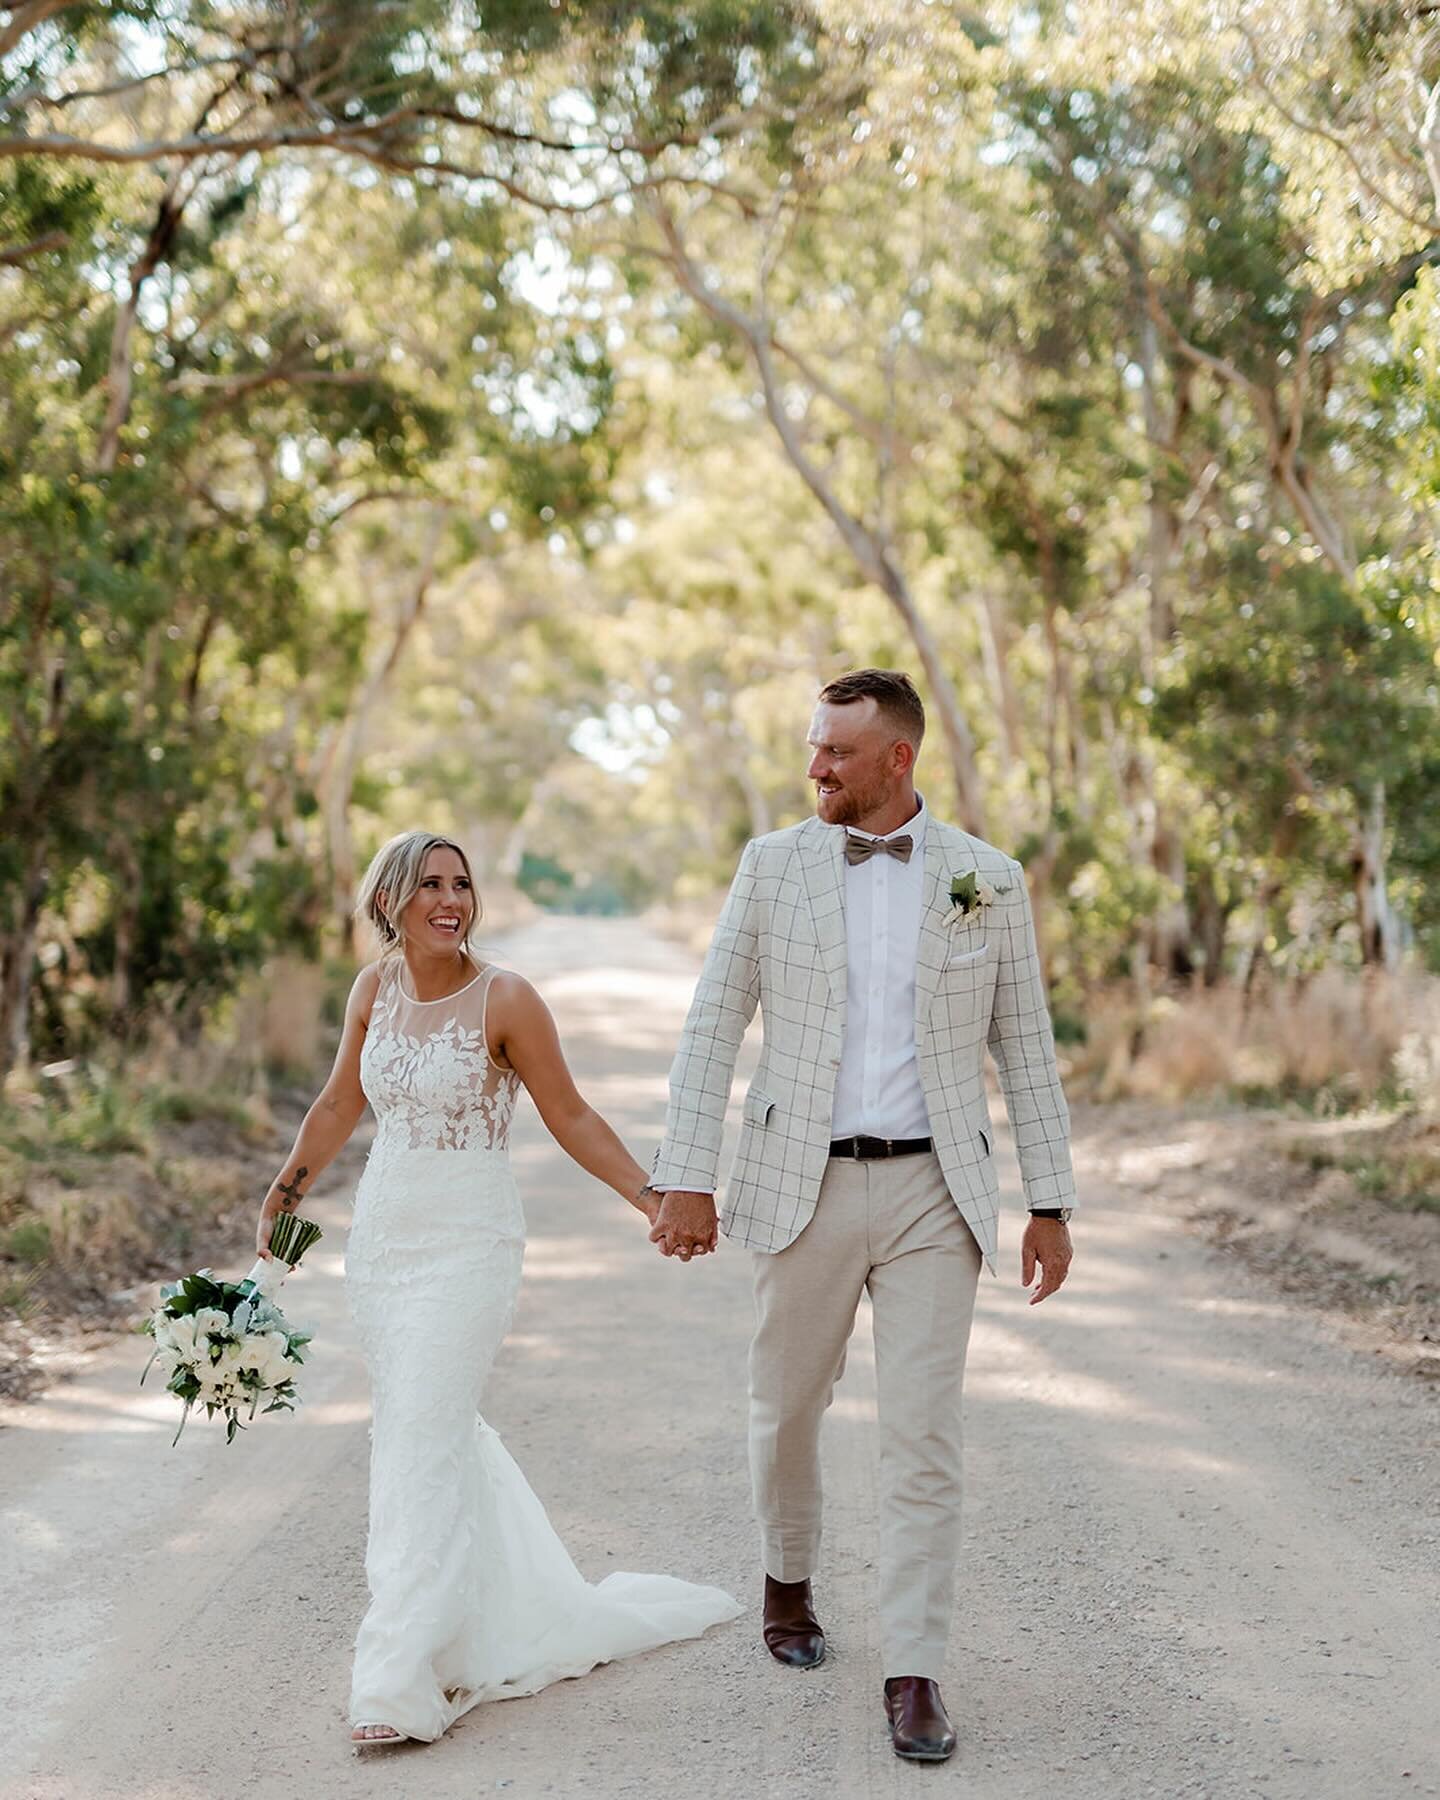 Happy one year to Madison + Sam 🤎👉🏽

photo + video / @wildbohoweddings 
venue / @foxgordon 
celebrant / @weddingswithrosie 
makeup / @kristenalice_mua 
hair / @blushing.bridal.hair 
styling / @mase_events 
catering / @chief_catering 

🏷️ Adelaide